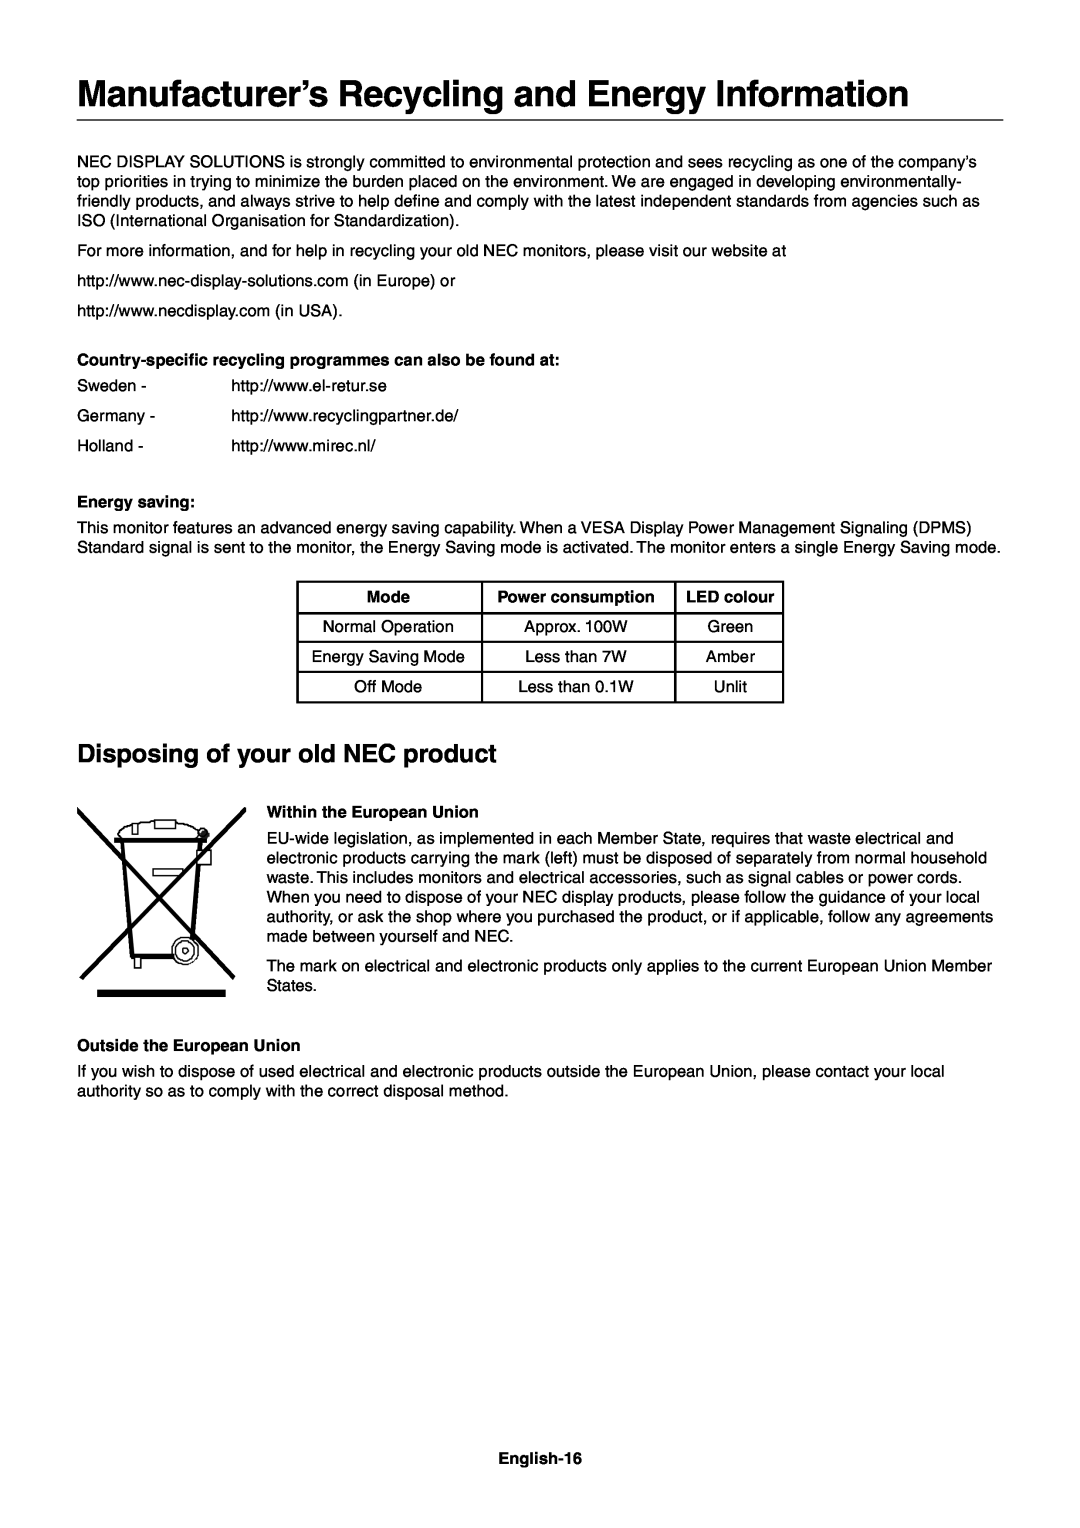 NEC LCD2180 Manufacturer’s Recycling and Energy Information, Disposing of your old NEC product, Energy saving, Mode 